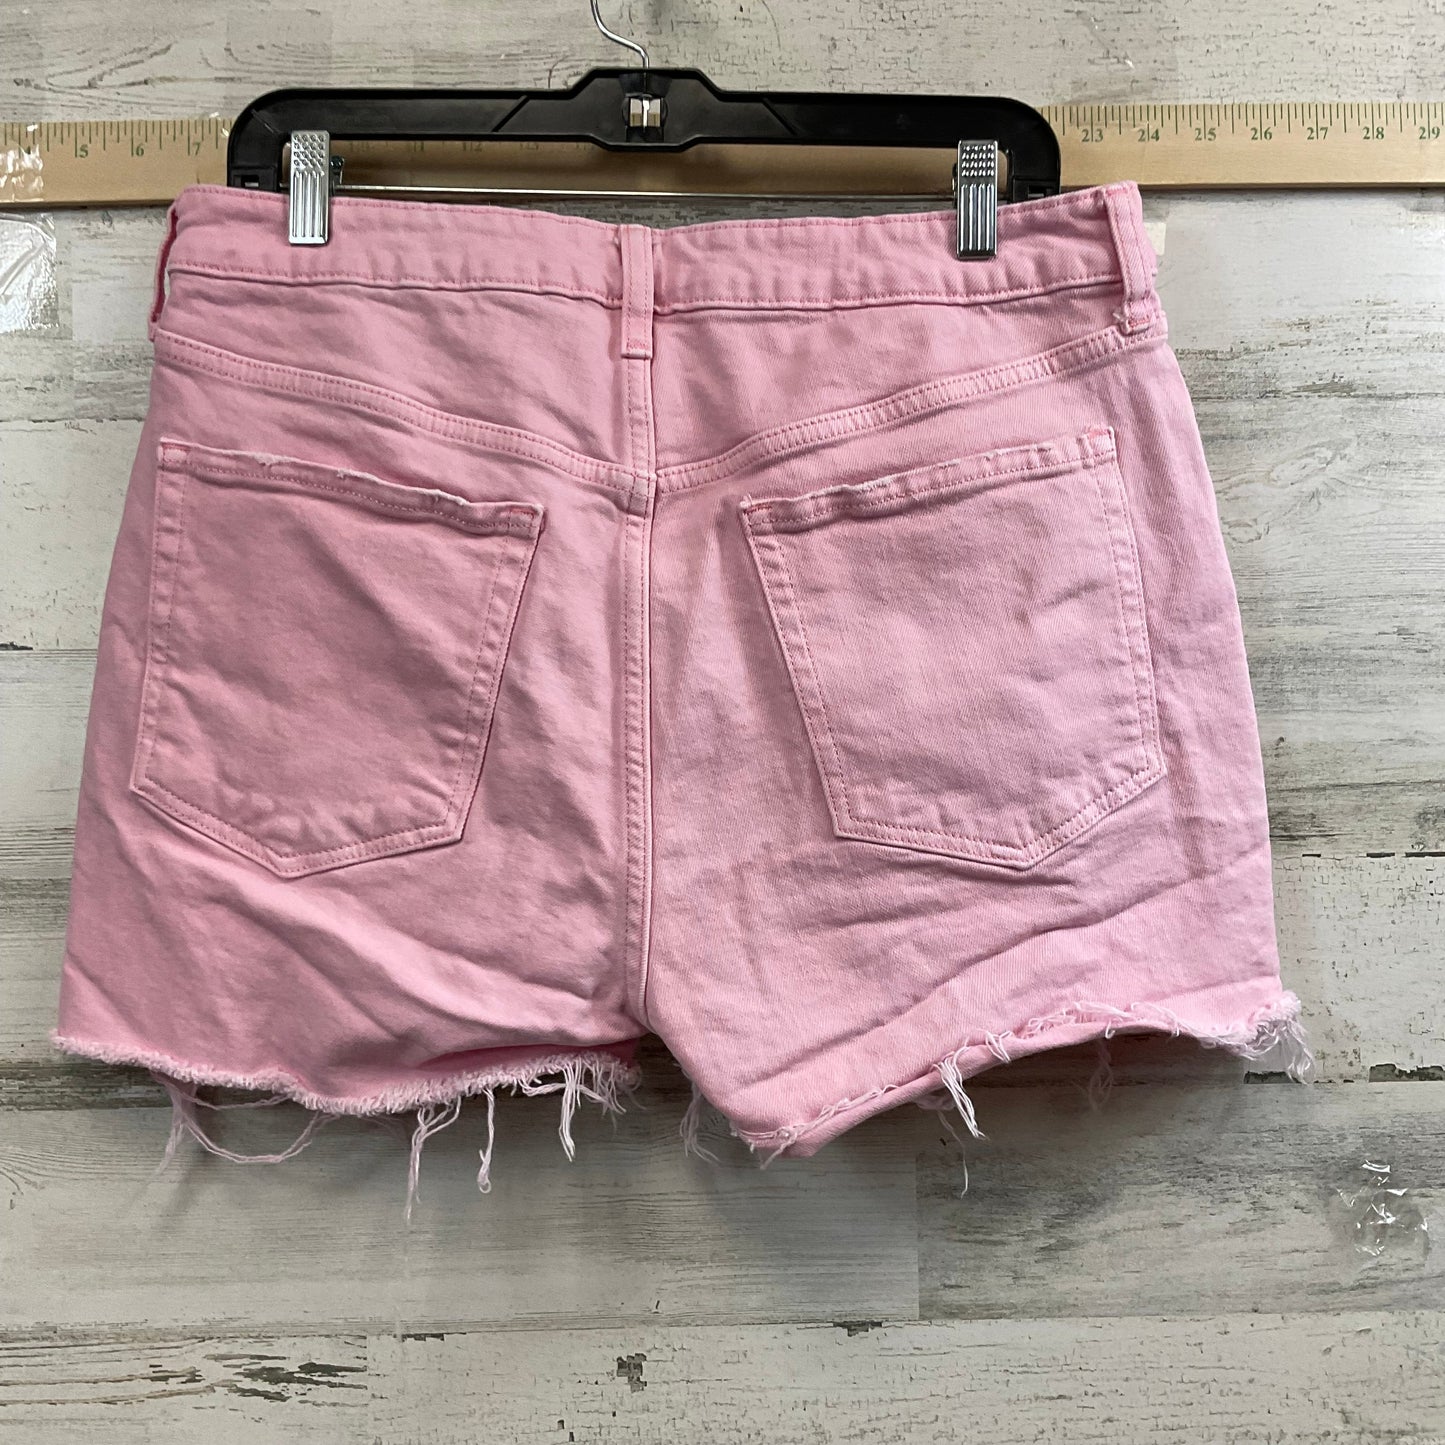 Pink Shorts Old Navy, Size 14